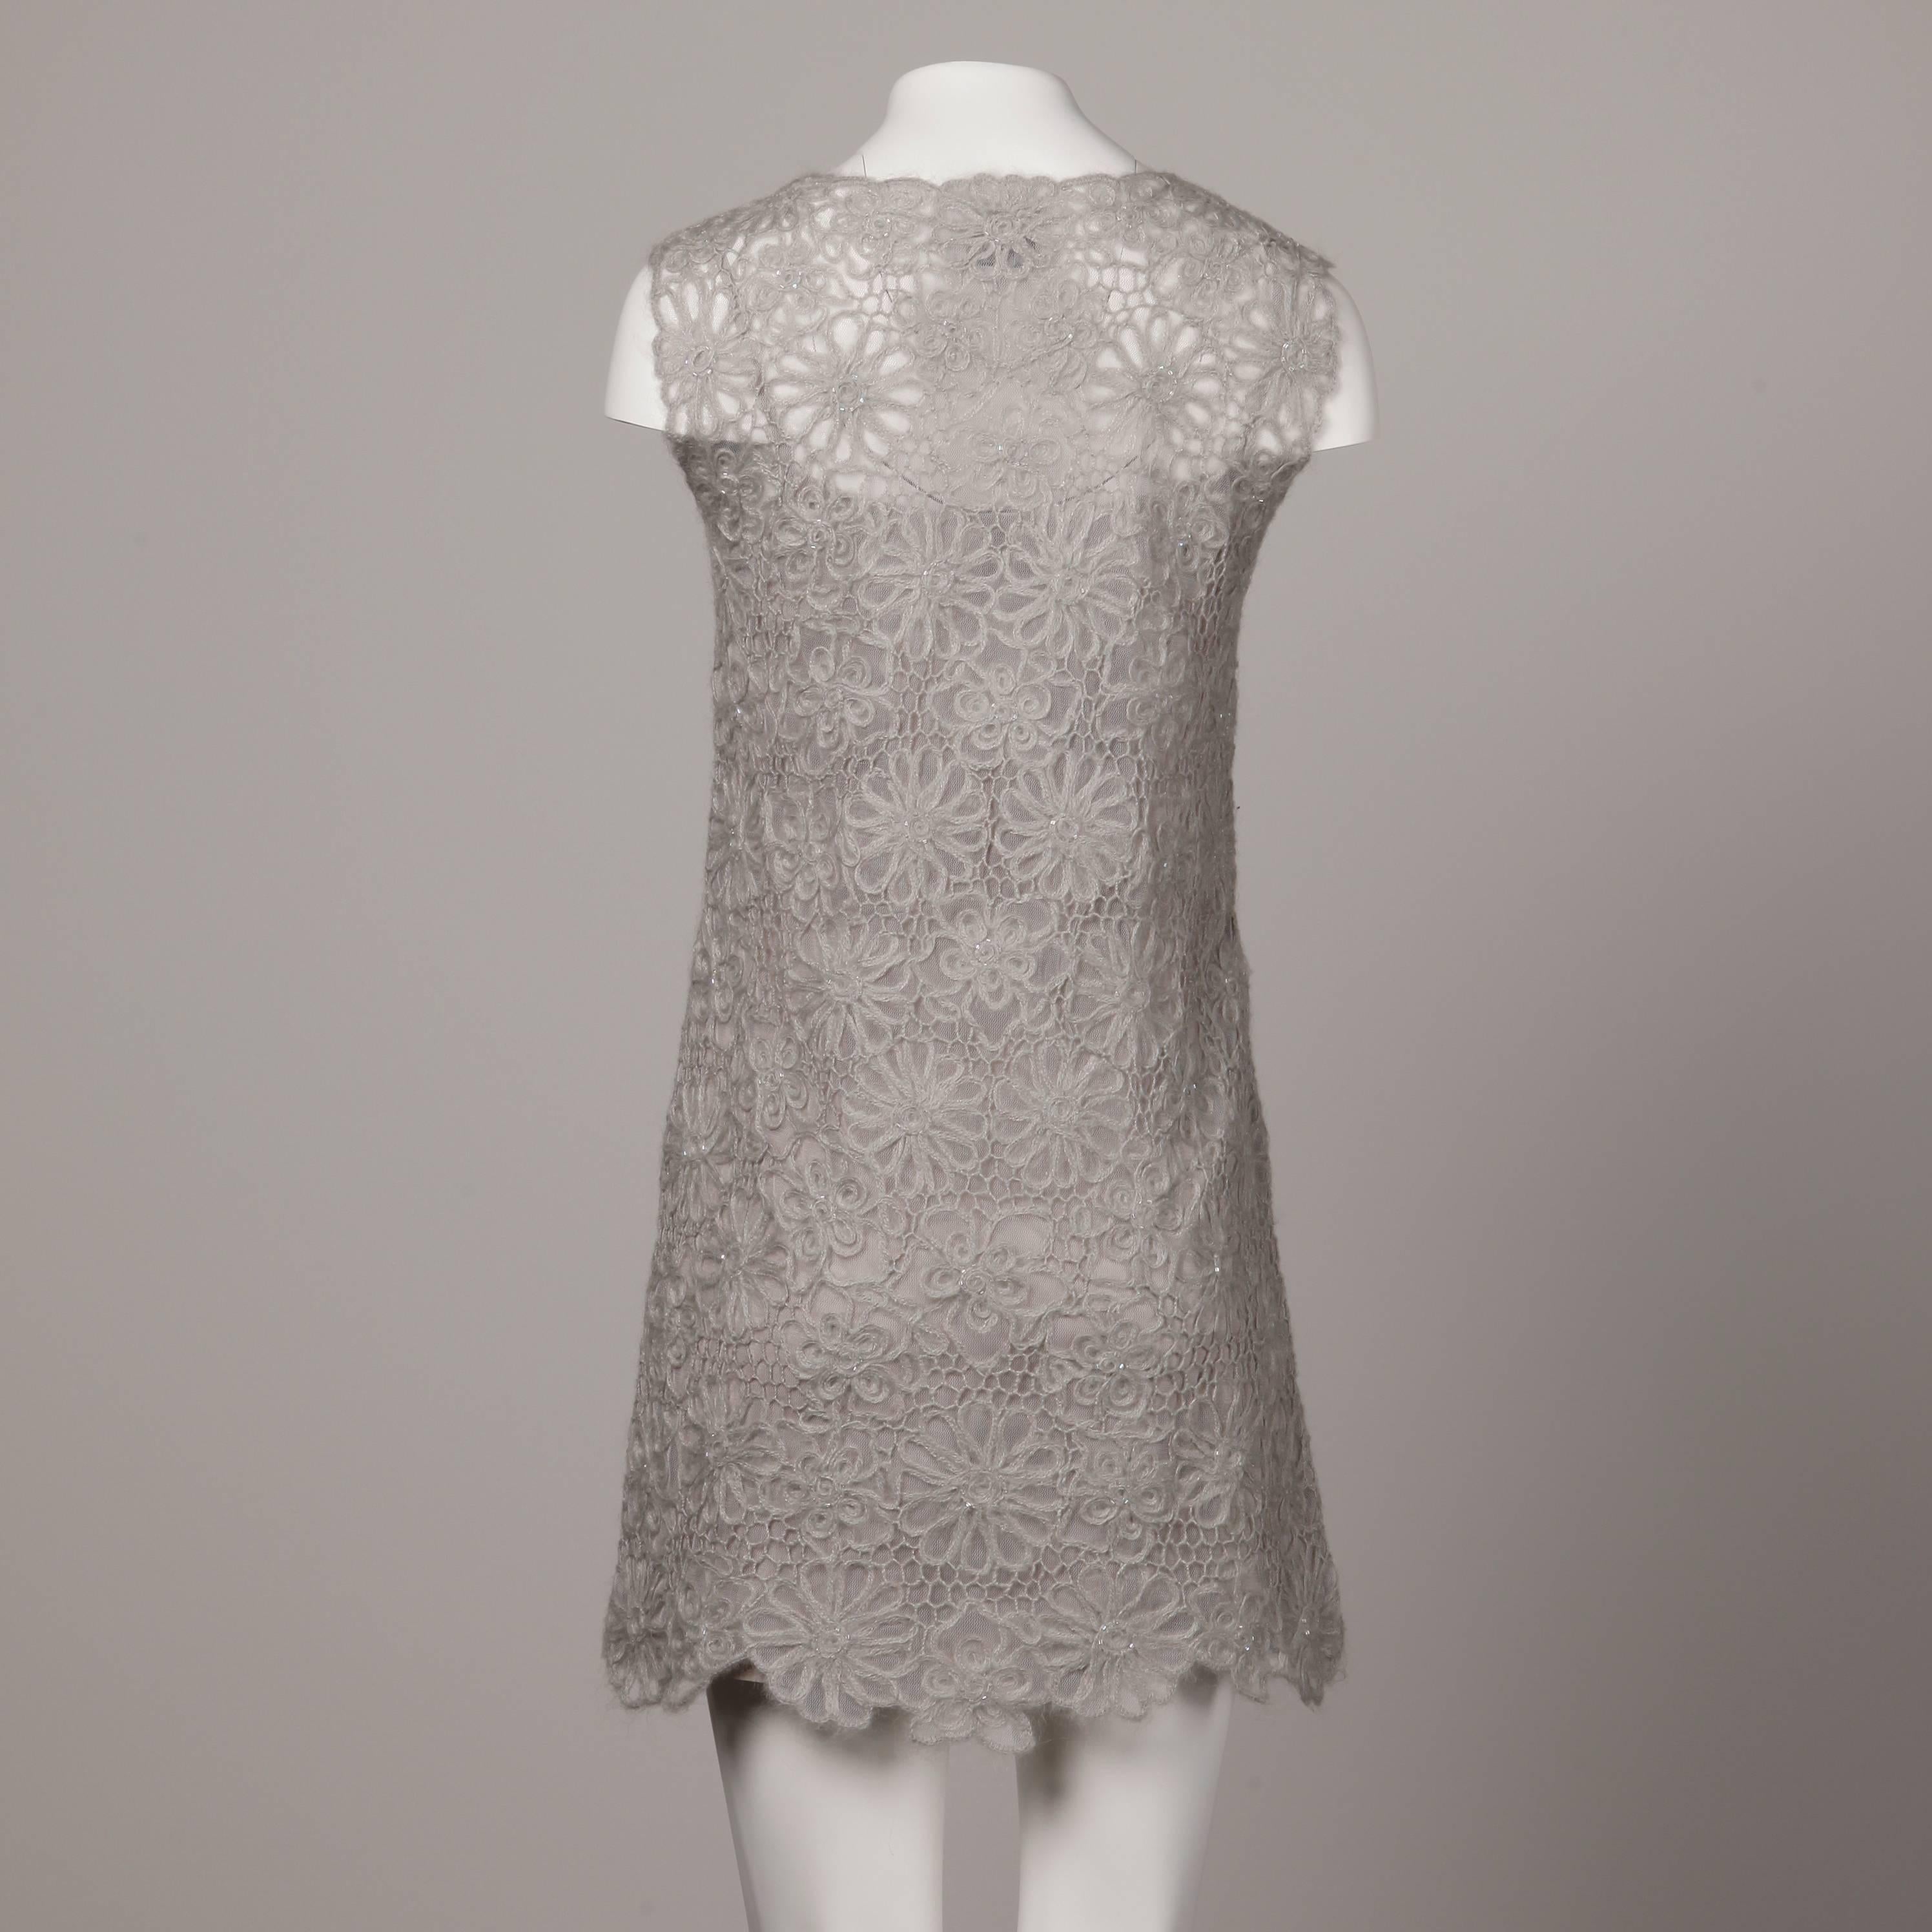 Moschino Vintage Gray Beaded Crochet Lace Shift Dress, 1990s  In Excellent Condition For Sale In Sparks, NV